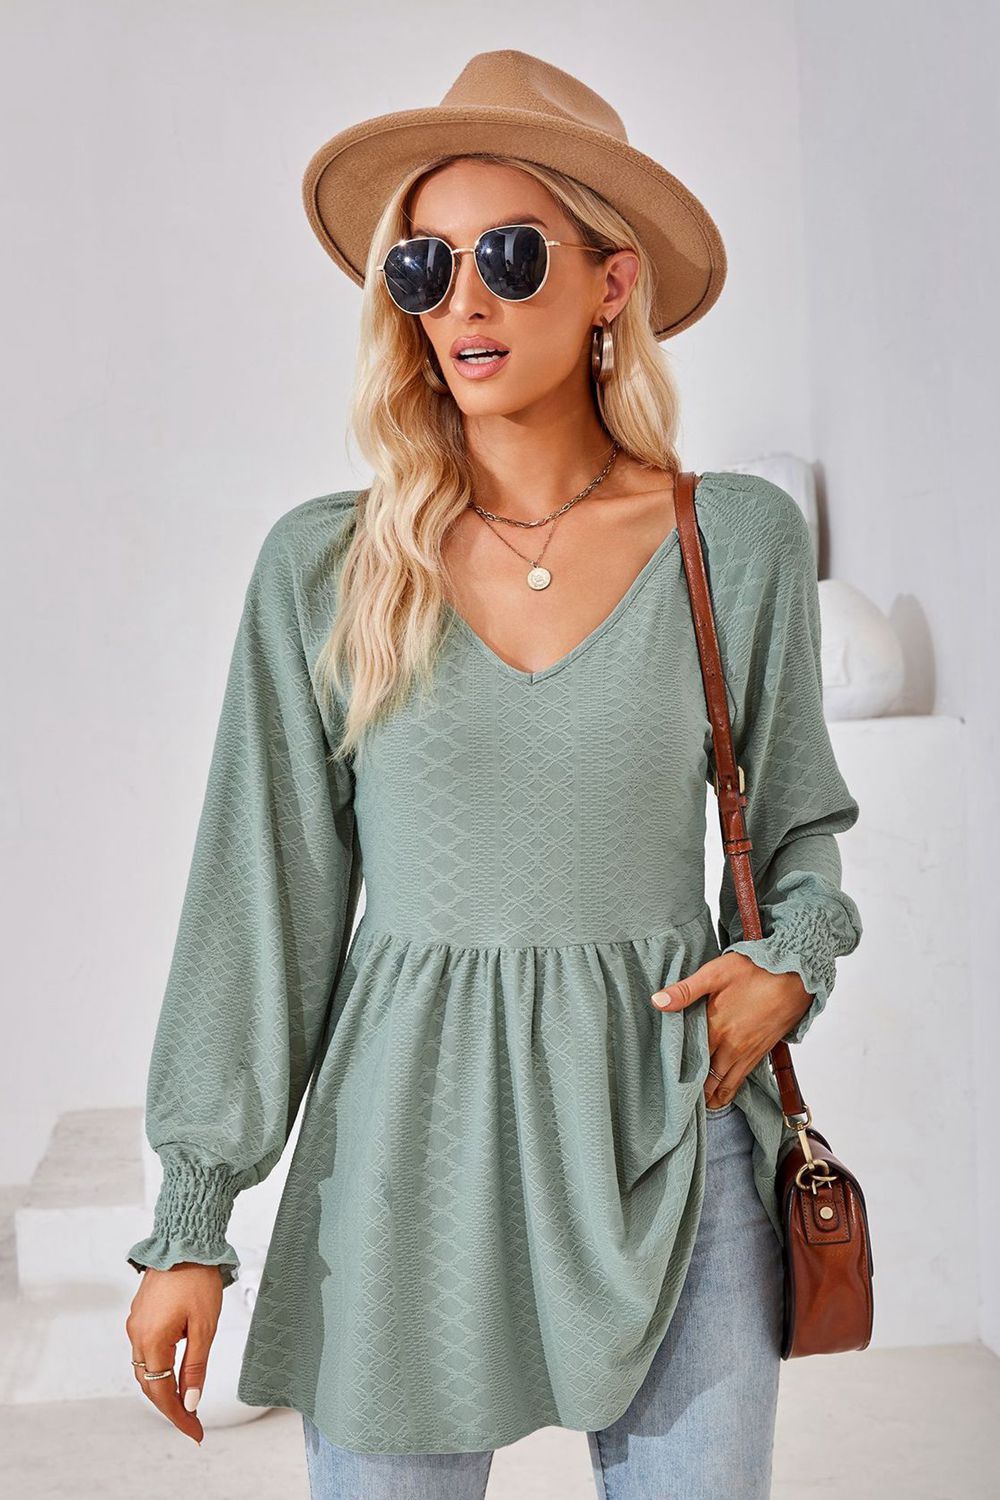 V-Neck Lantern Sleeve Blouse - Light Green / S - Women’s Clothing & Accessories - Shirts & Tops - 7 - 2024